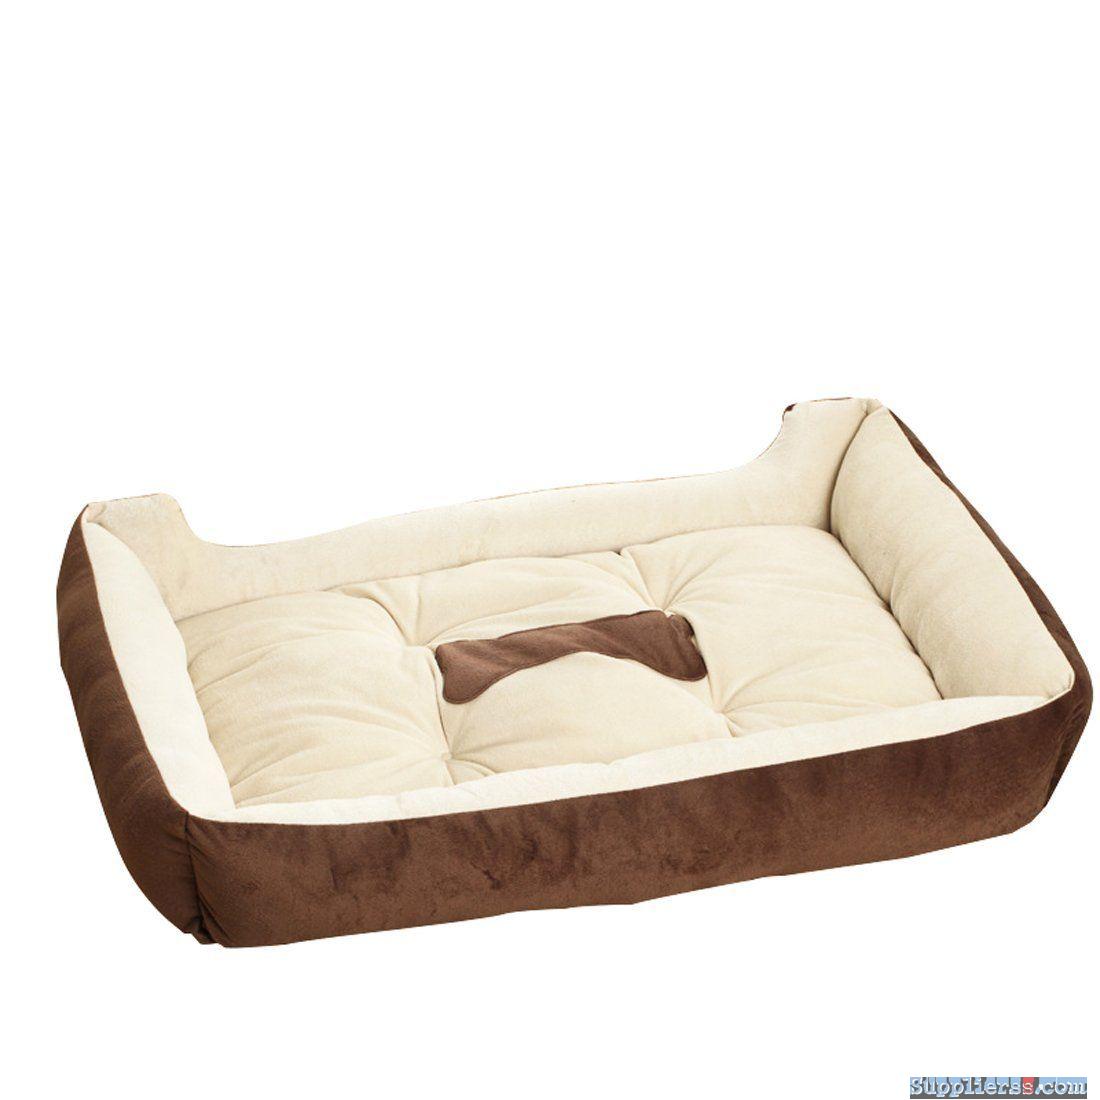 We make Pet's Beds and Accessories